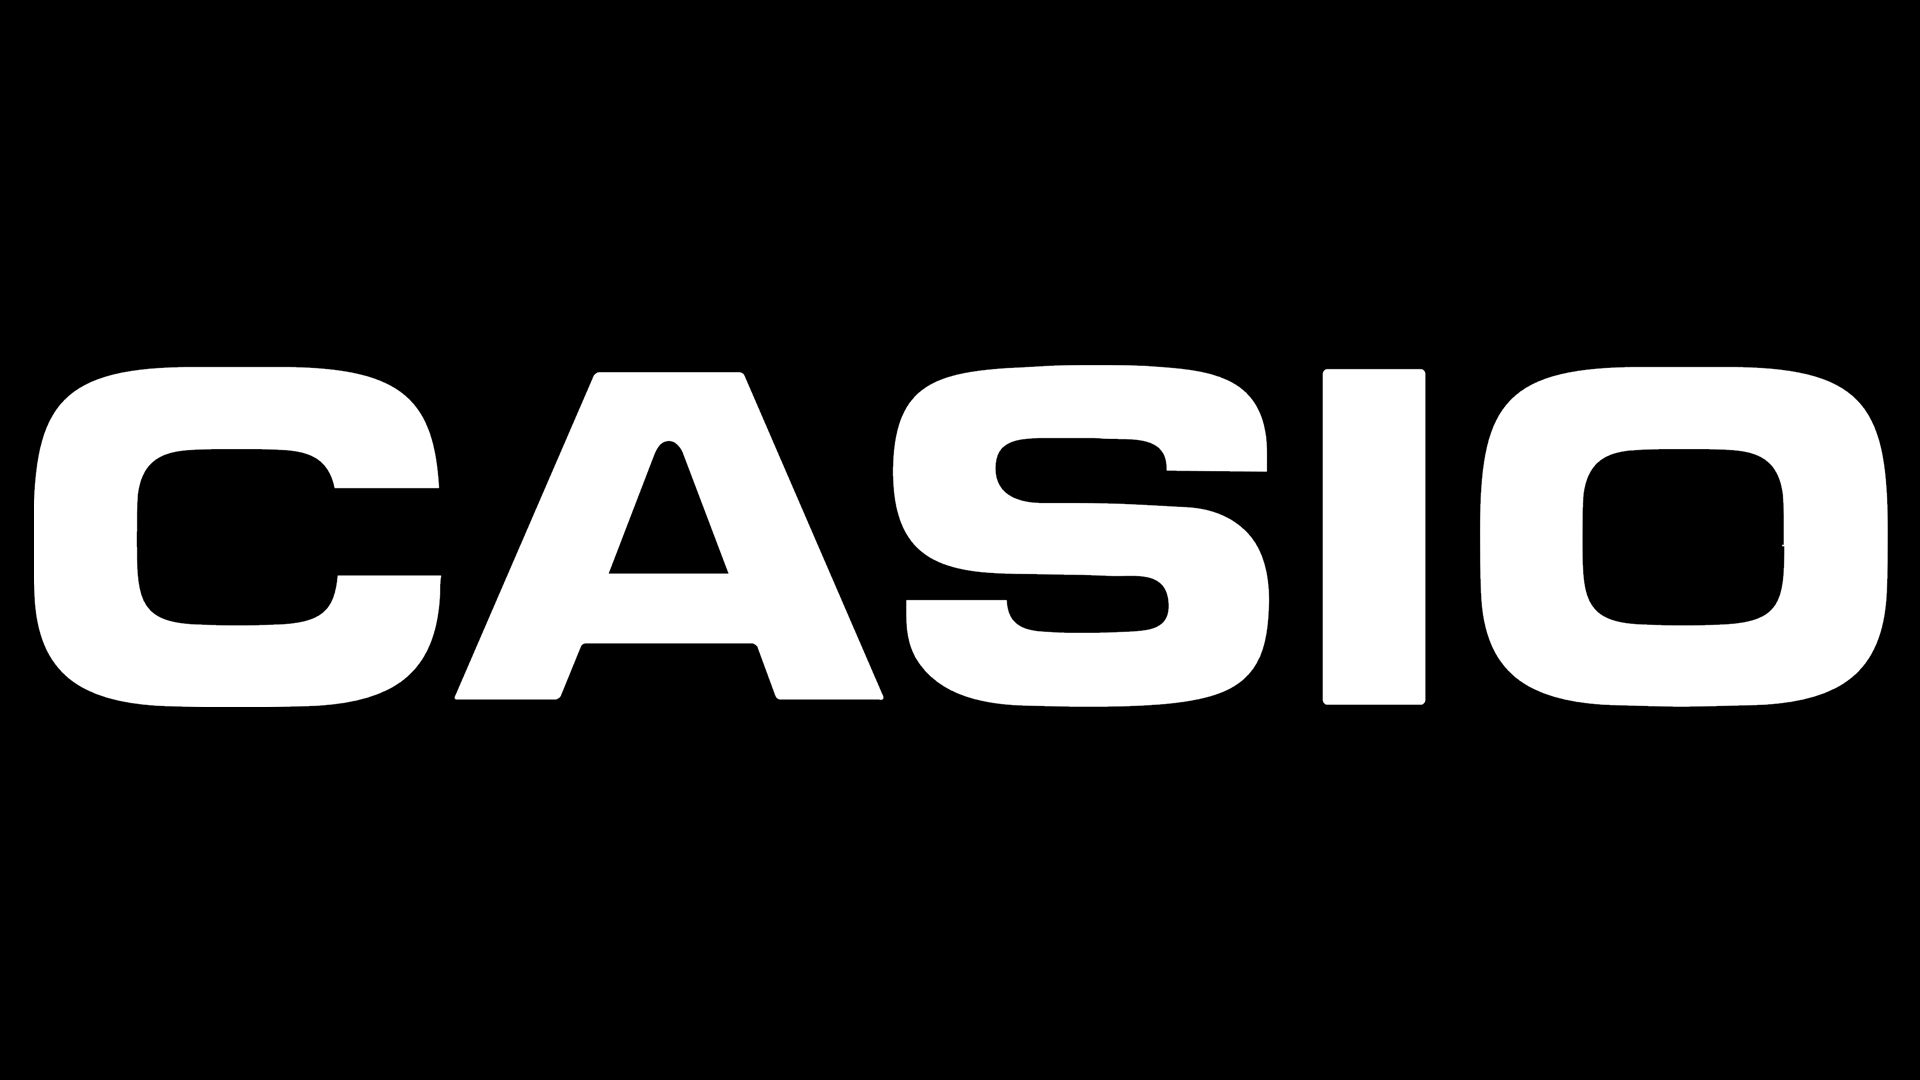 Casio Logo, Casio Symbol, Meaning, History and Evolution